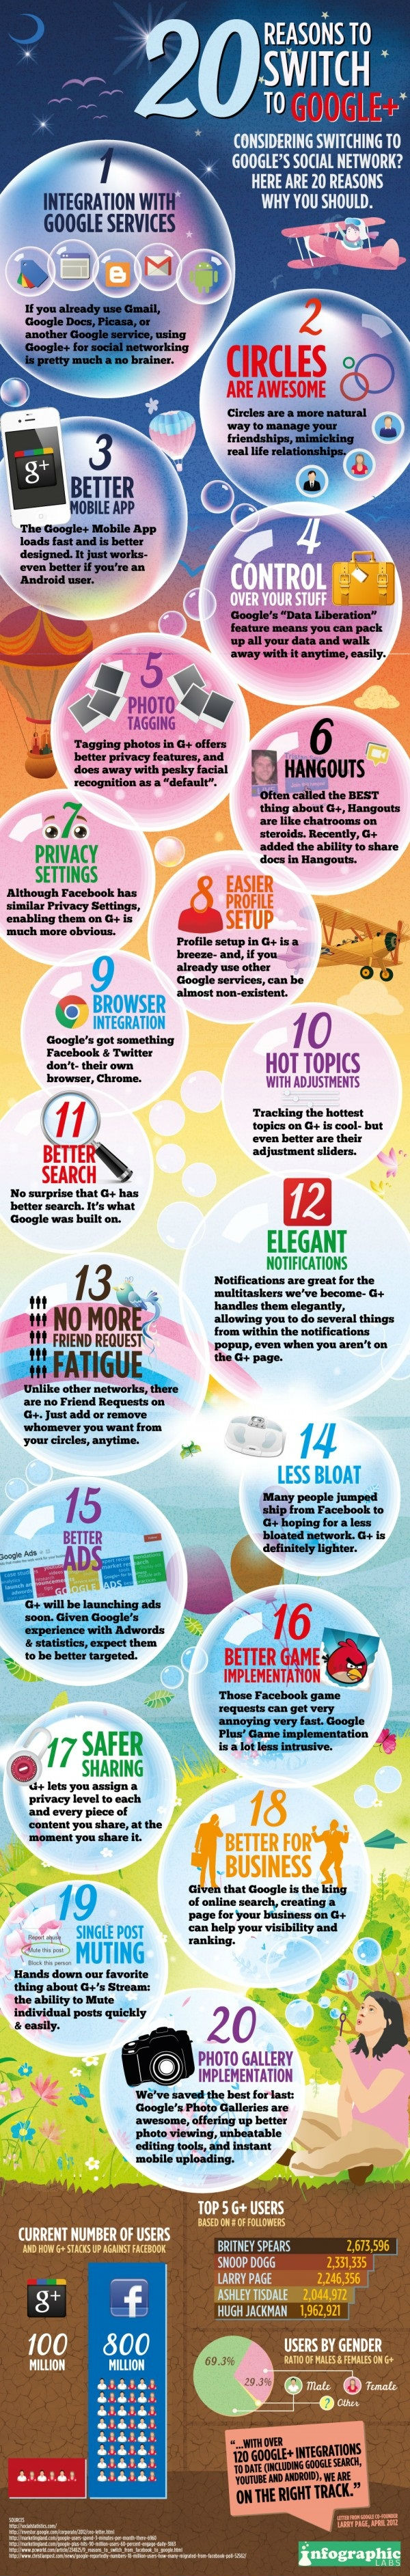 Why to Switch to Google+ Infographic